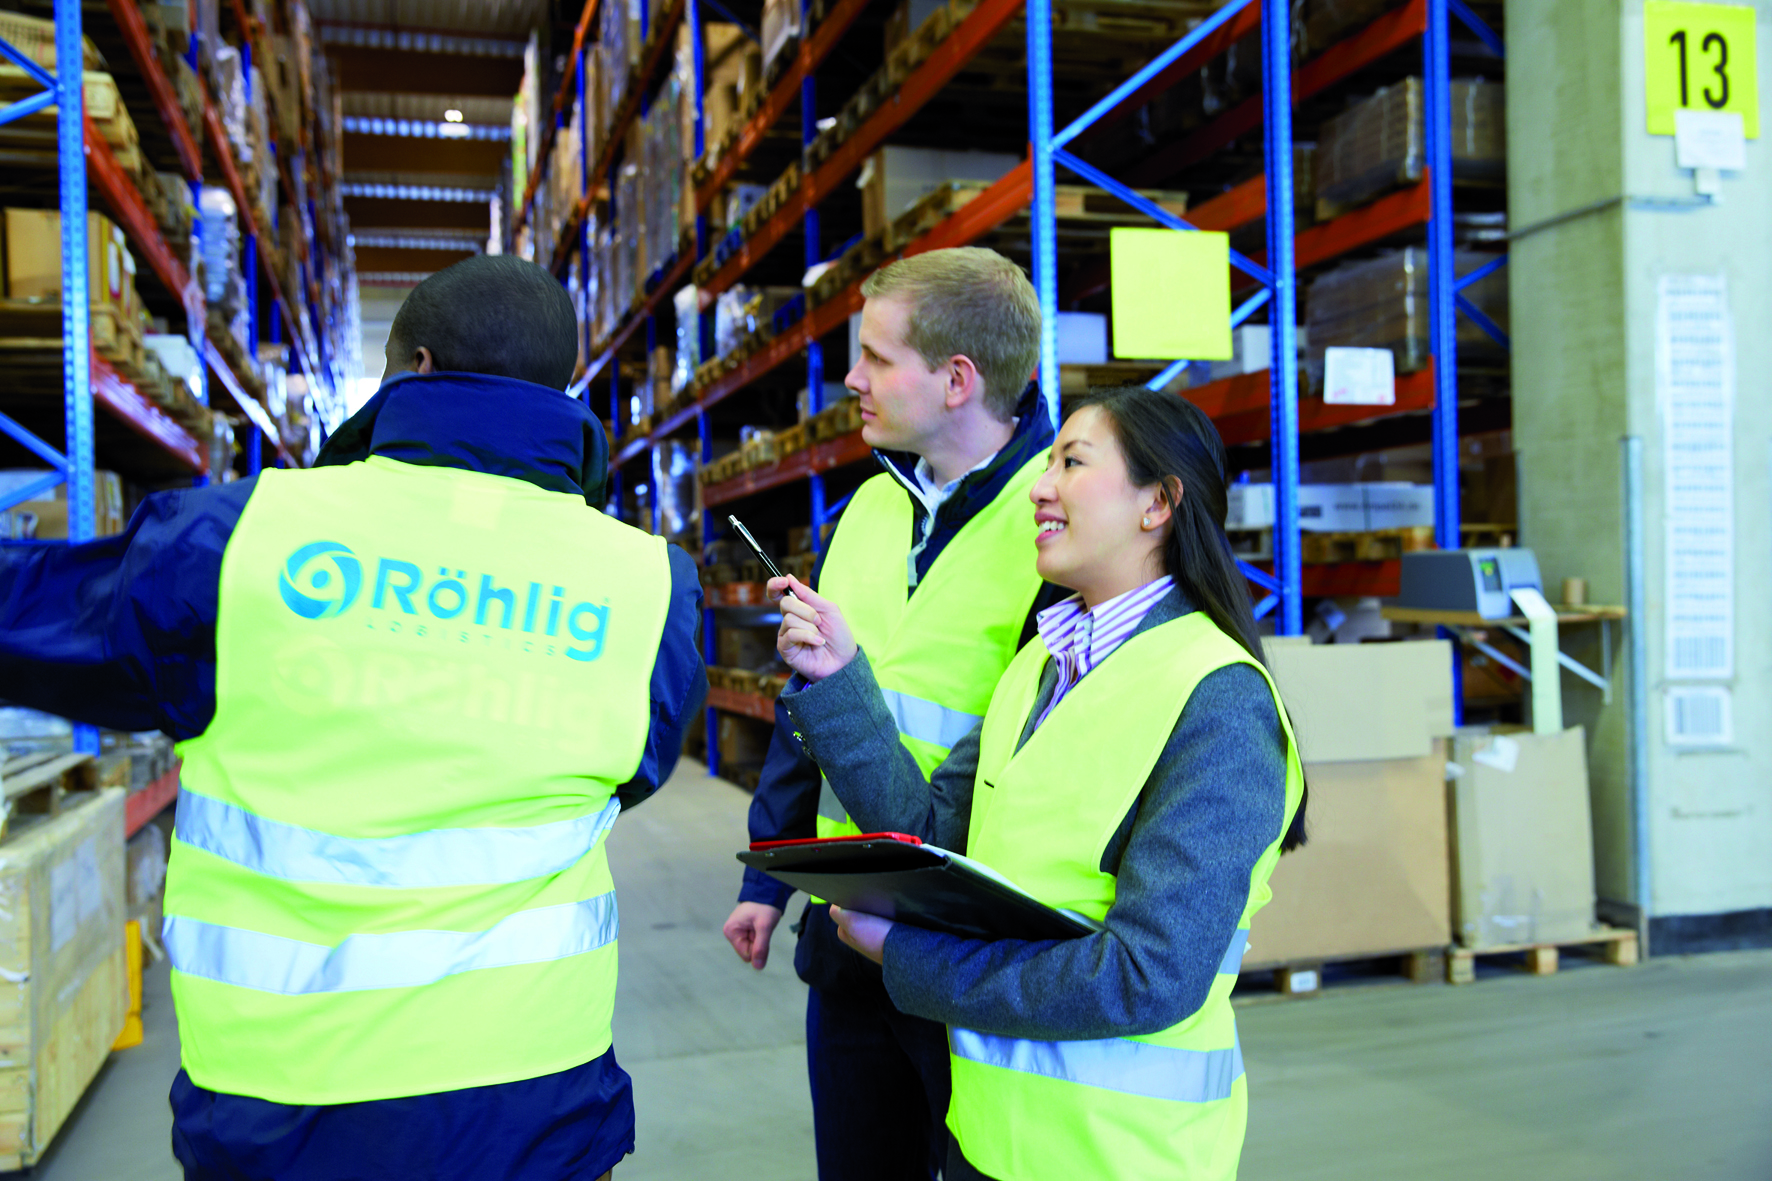 Röhlig continues to rely on personal customer contact